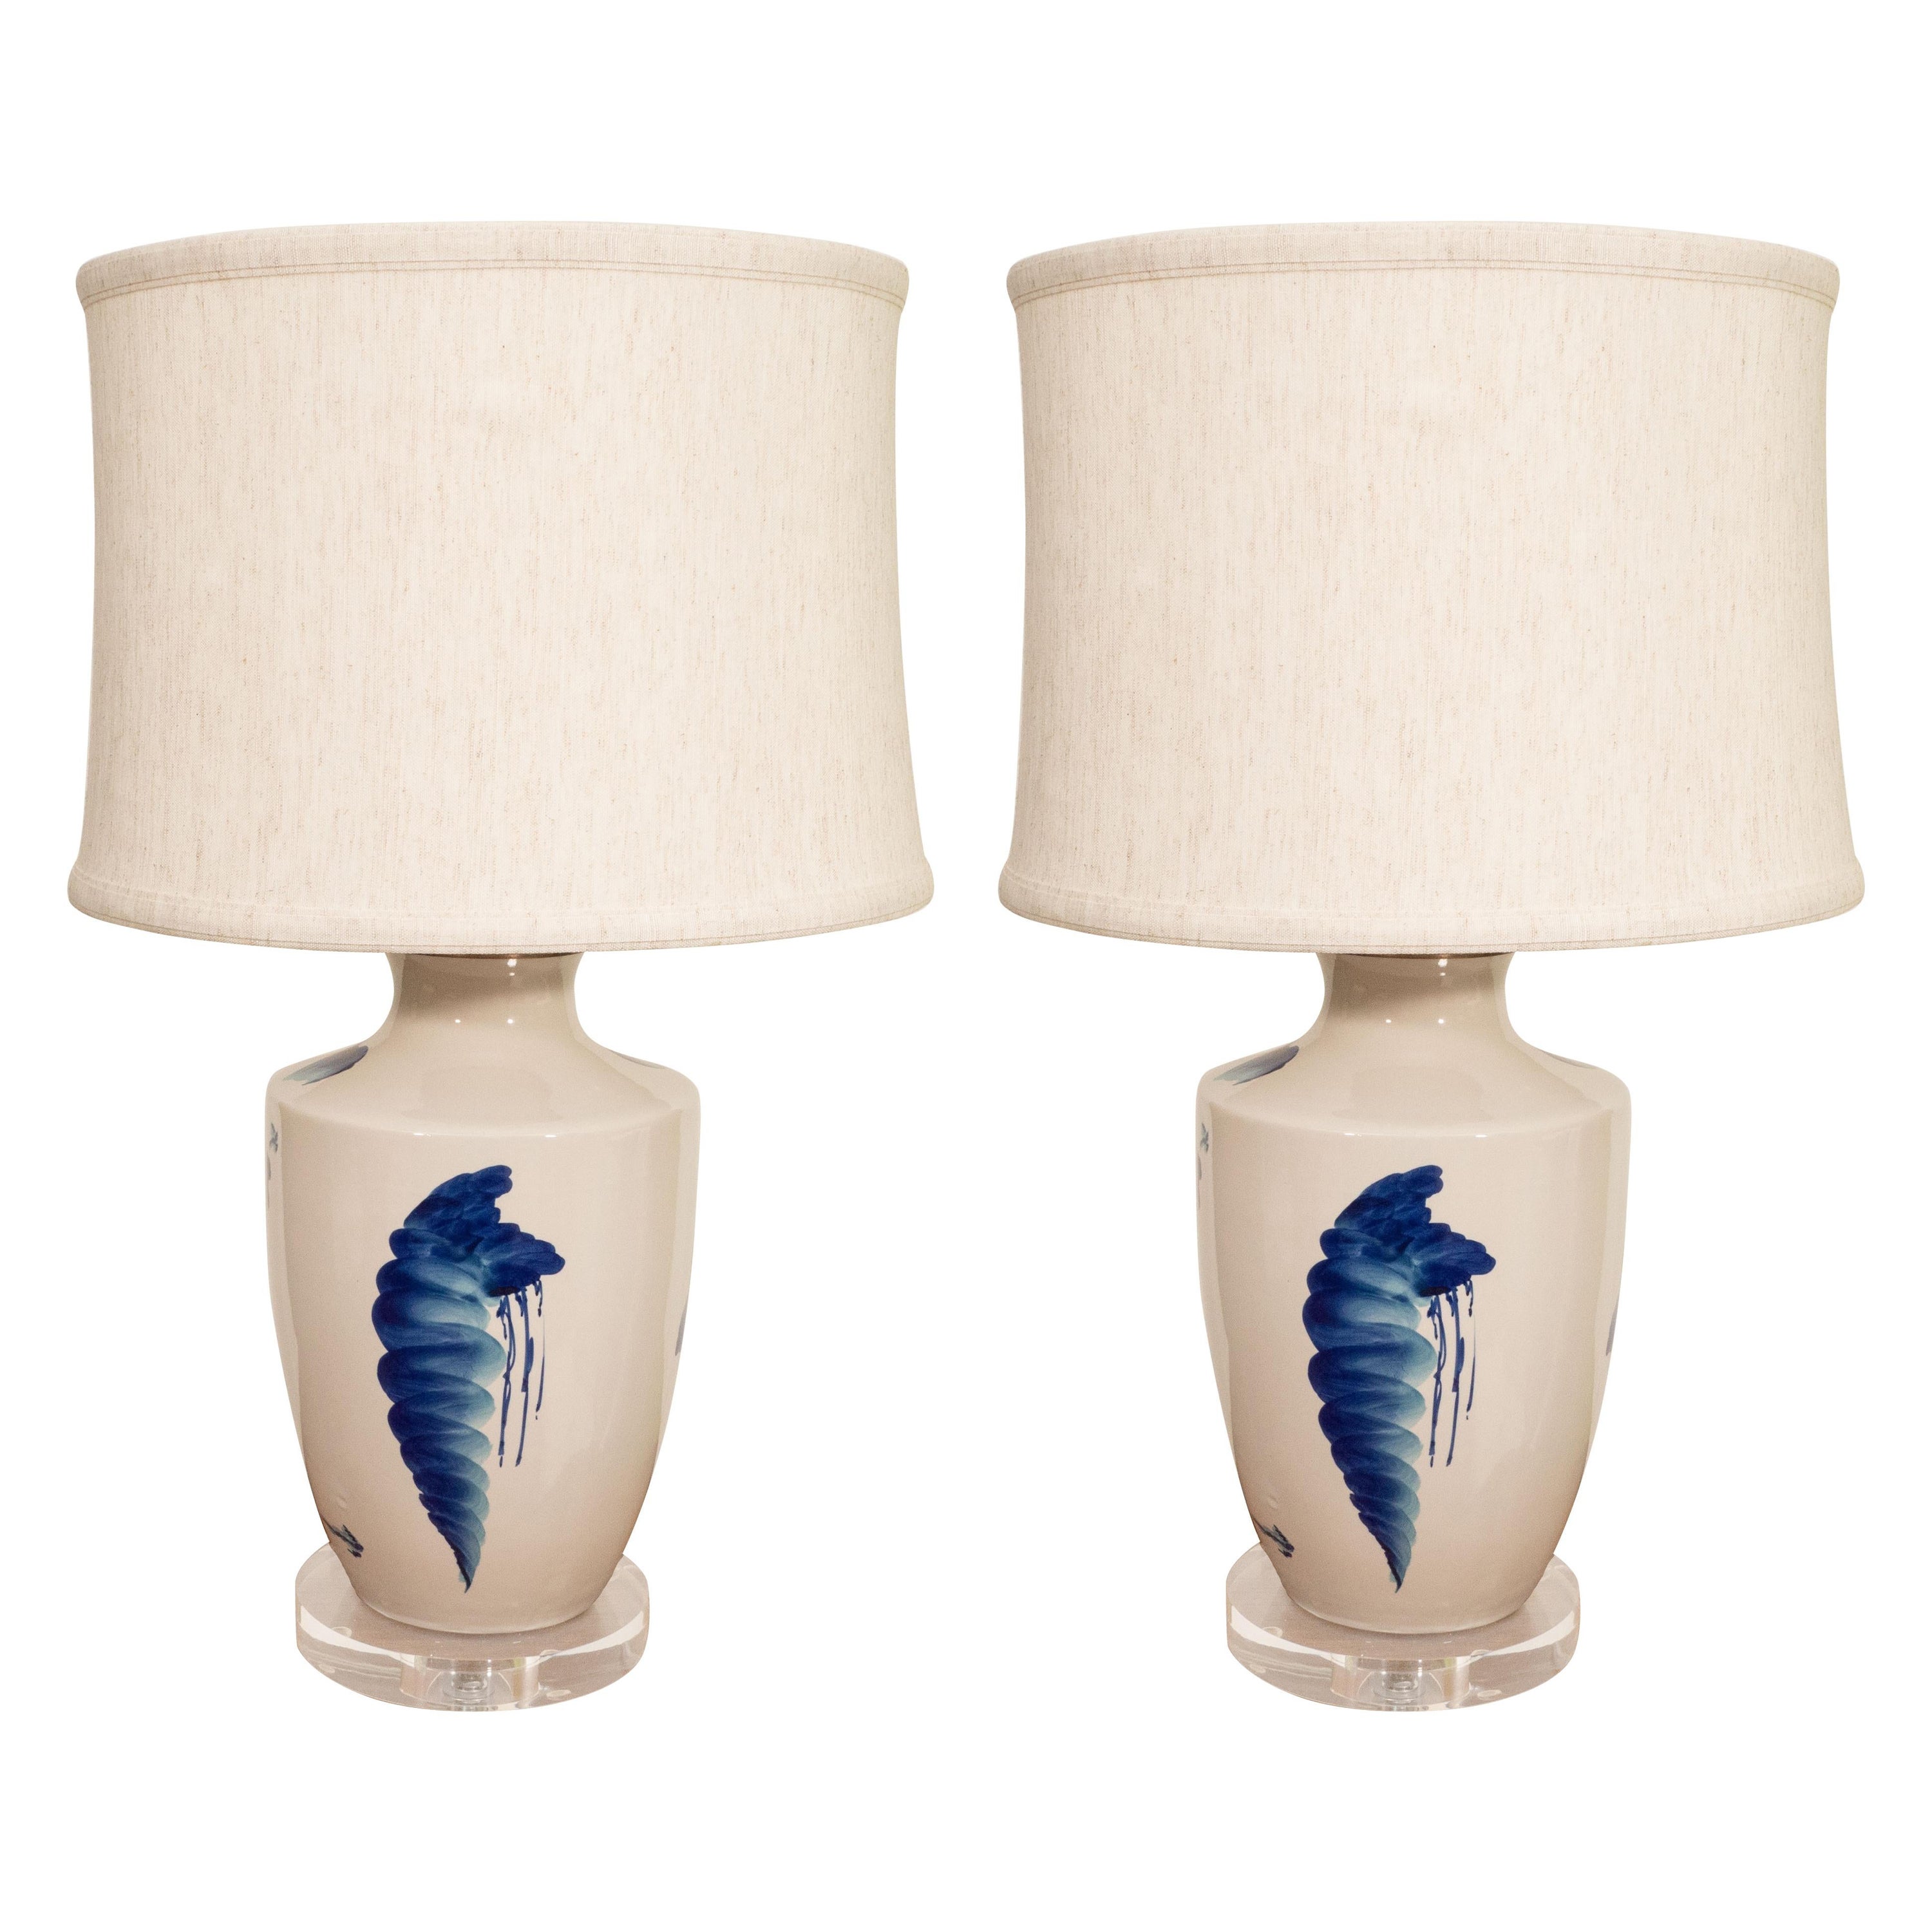 Pair of Blue and White Ceramic Lamps For Sale